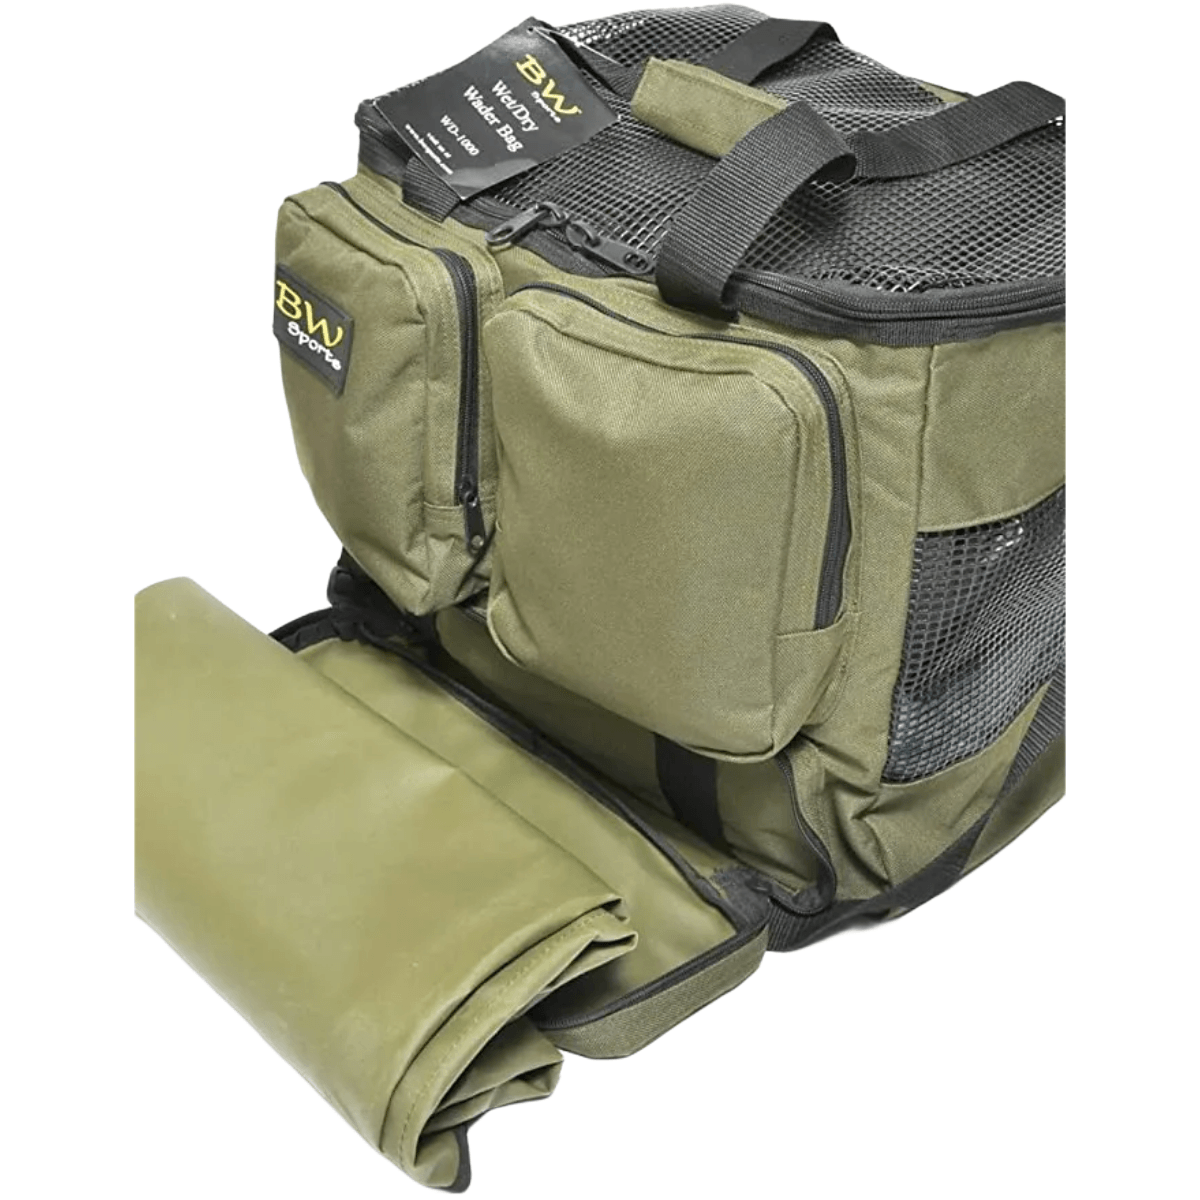 B W Sports Waders And Wading Boots Storage Carry Bag - Al's Sporting Goods:  Your One-Stop Shop for Outdoor Sports Gear & Apparel